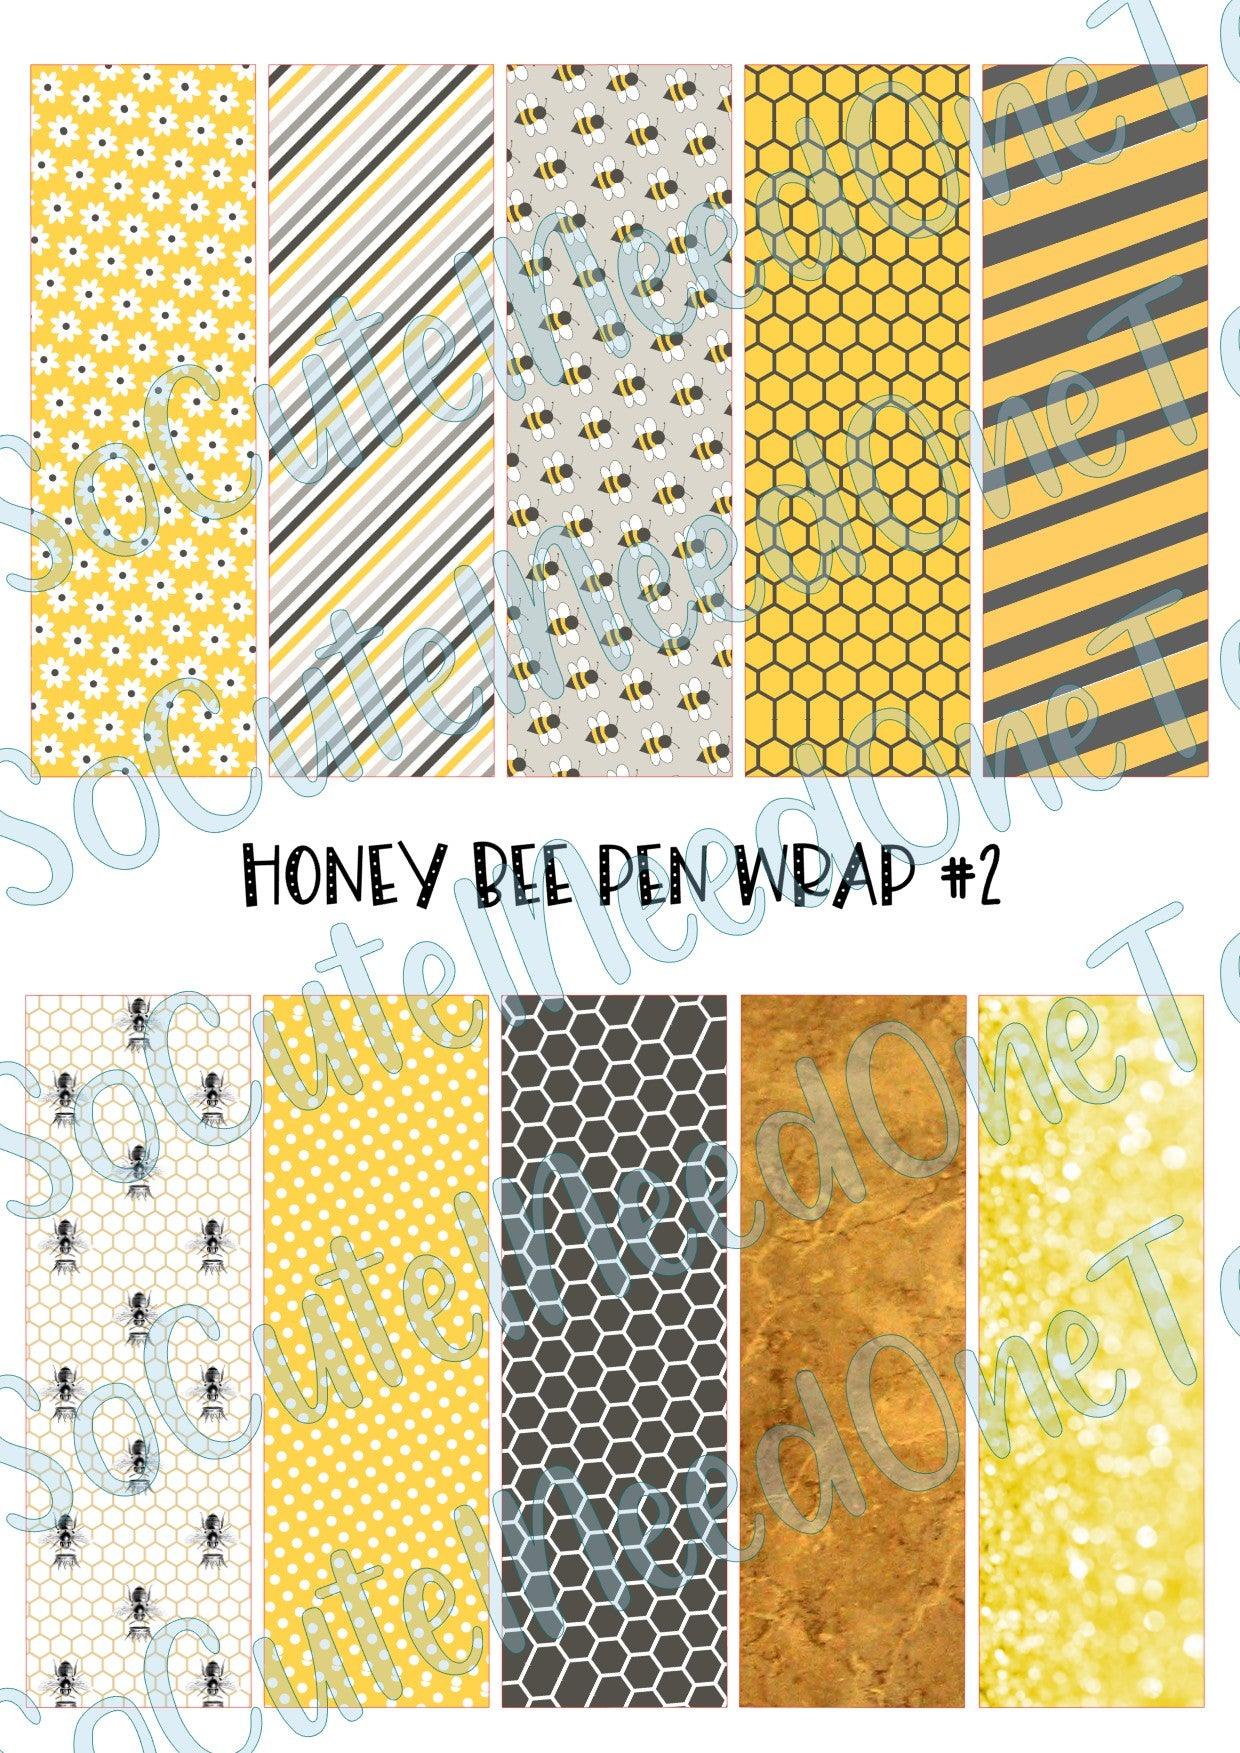 Honey Bee Pen Wraps #2 on Clear/White Waterslide Paper Ready To Use - SoCuteINeedOneToo